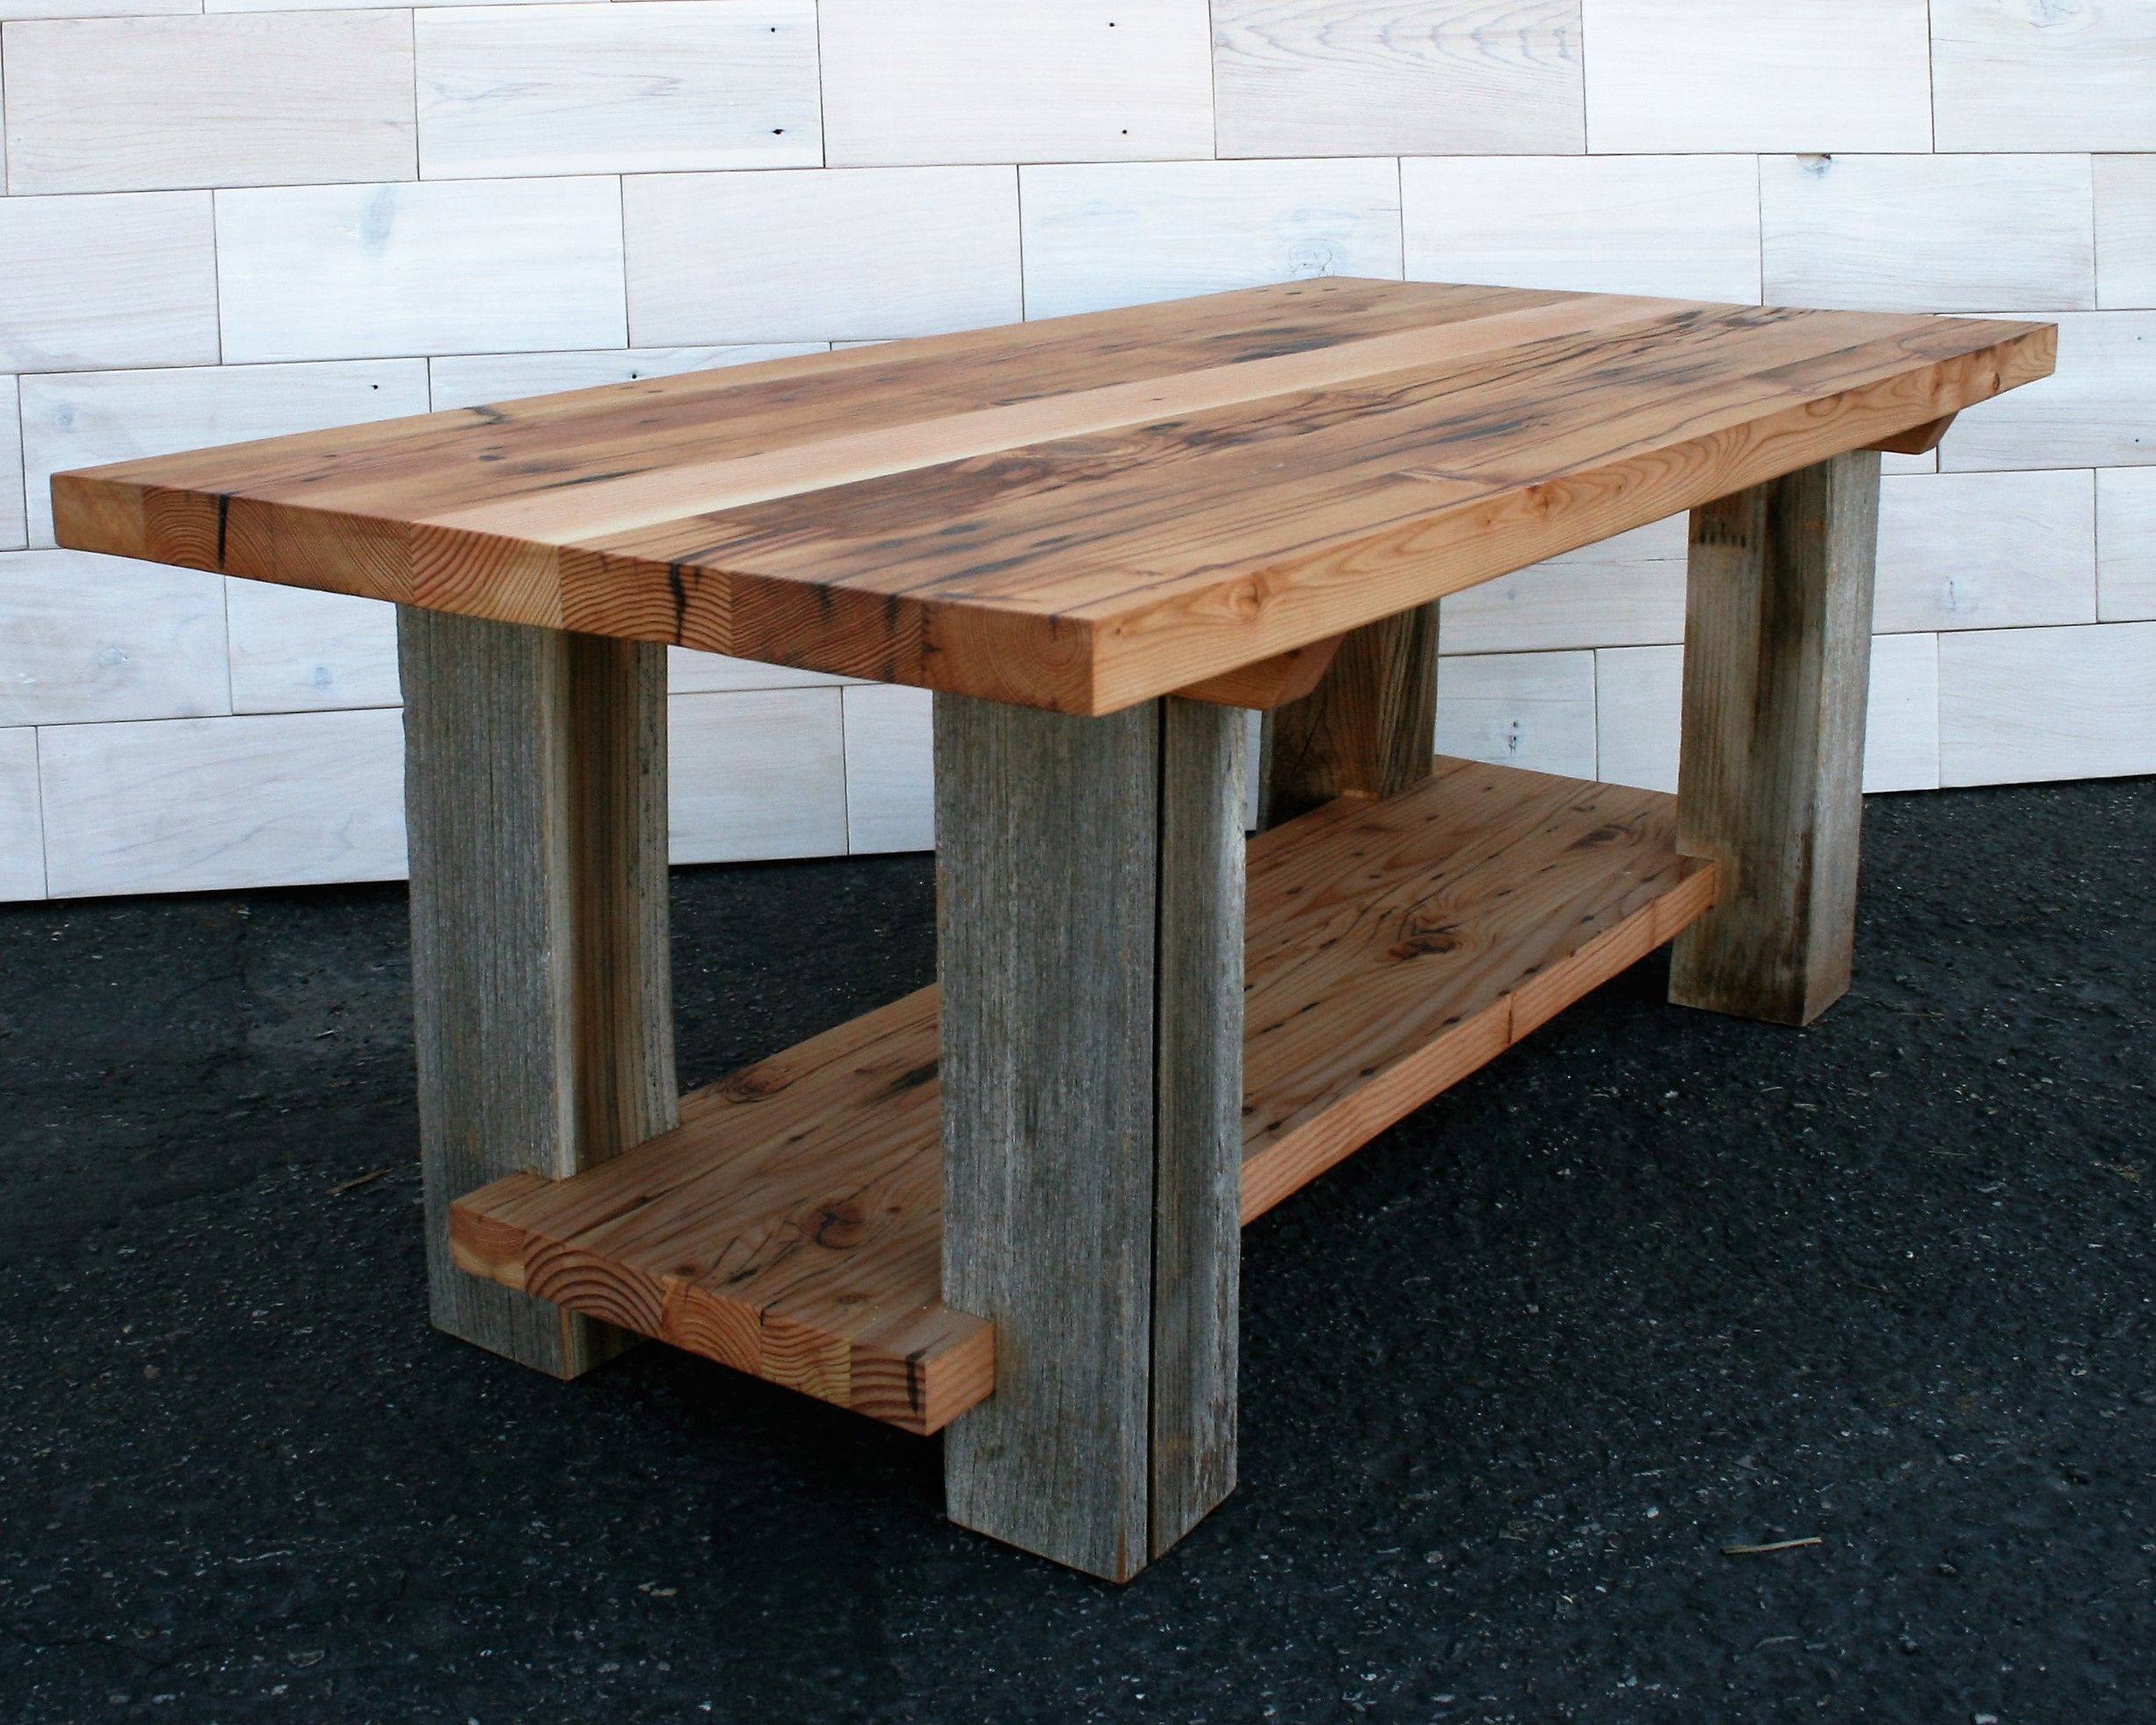 Custom Reclaimed Fir And Barn Wood Coffee Tablehistoricwoods Intended For Coffee Tables With Storage And Barn Doors (Gallery 10 of 20)